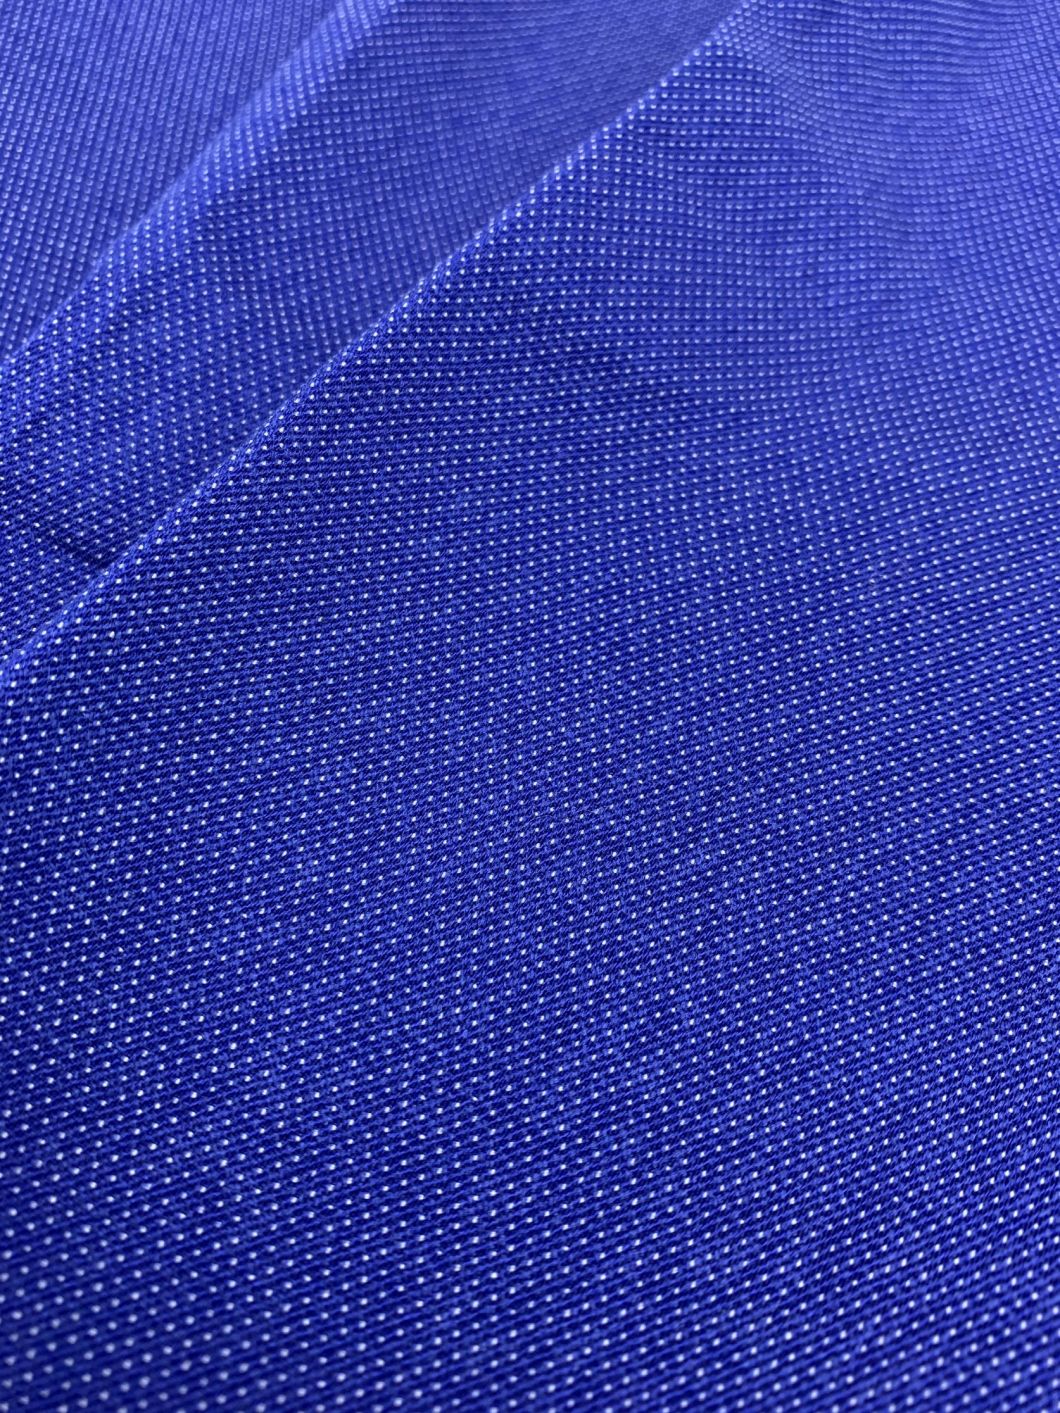 100%Polyester Pongee Suiting Fabric Price Per Meter Twill